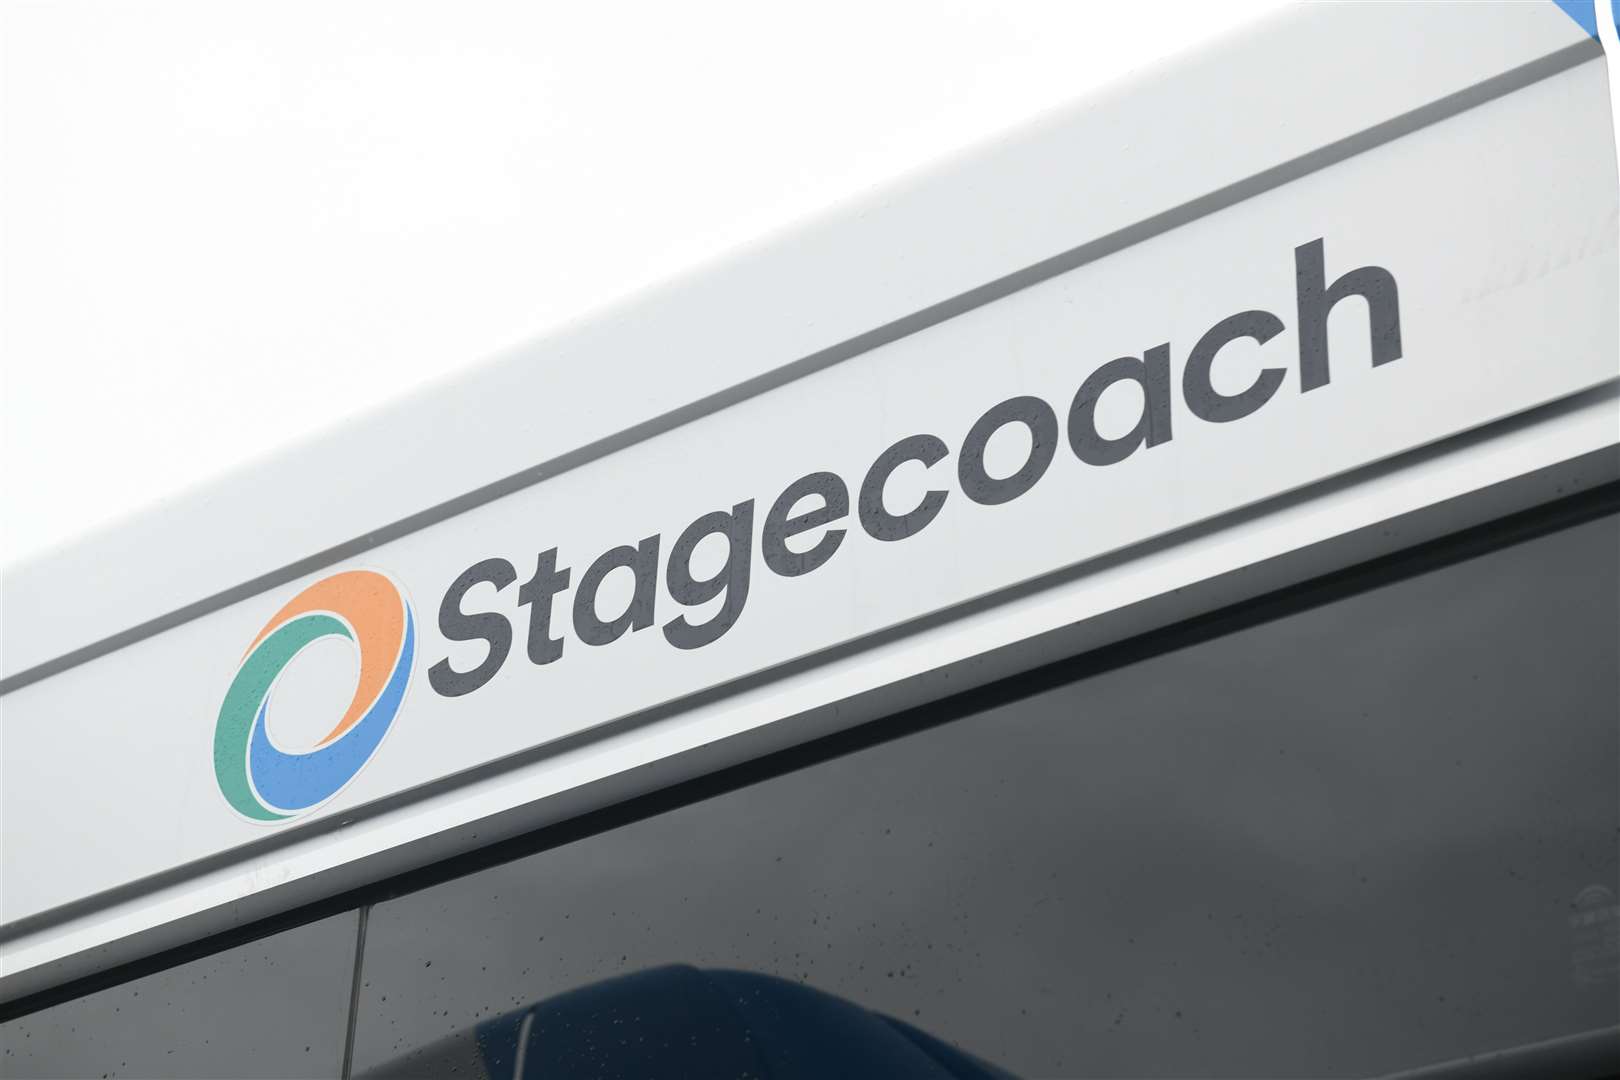 Stagecoach has come under fire for its reliability issues. Picture: James Mackenzie.